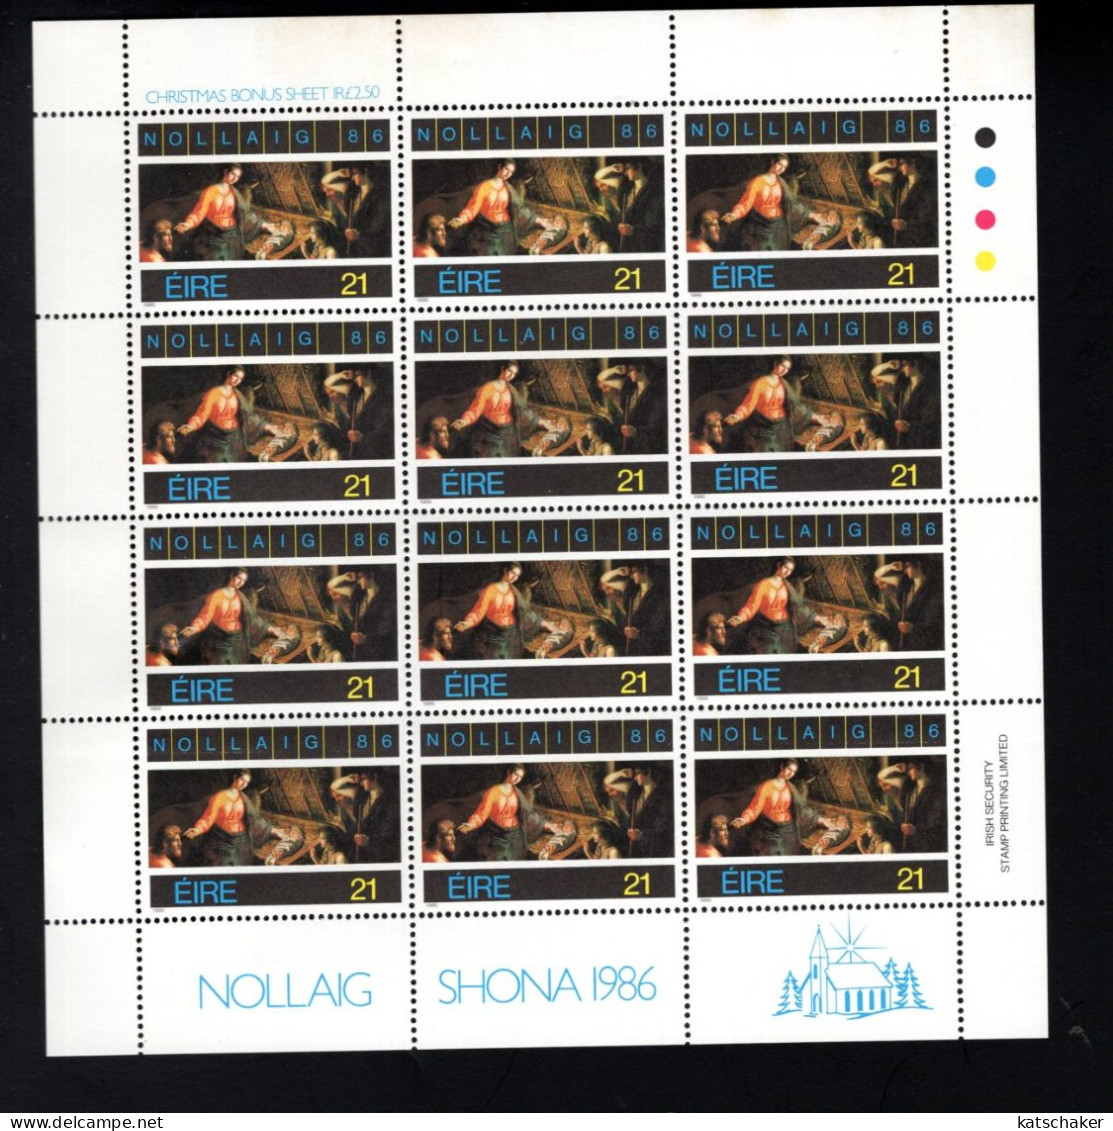 1999459424 1986  SCOTT 677 (XX) POSTFRIS  MINT NEVER HINGED - CHRISTMAS - ADORATION OF THE SHEPPERS DISCOUNT SHEET 12 - Nuovi